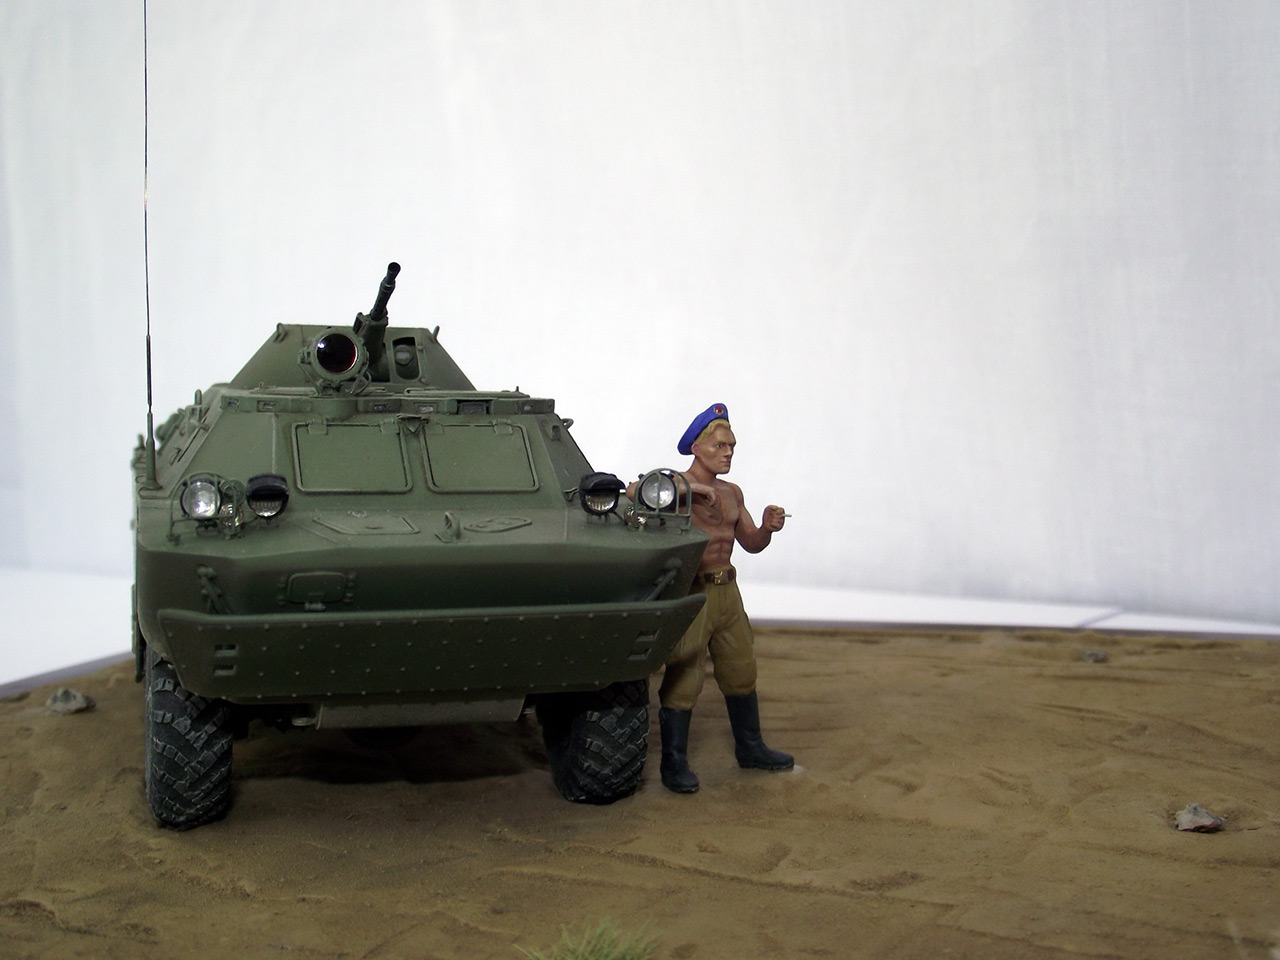 Dioramas and Vignettes: Demobilization is soon!, photo #14